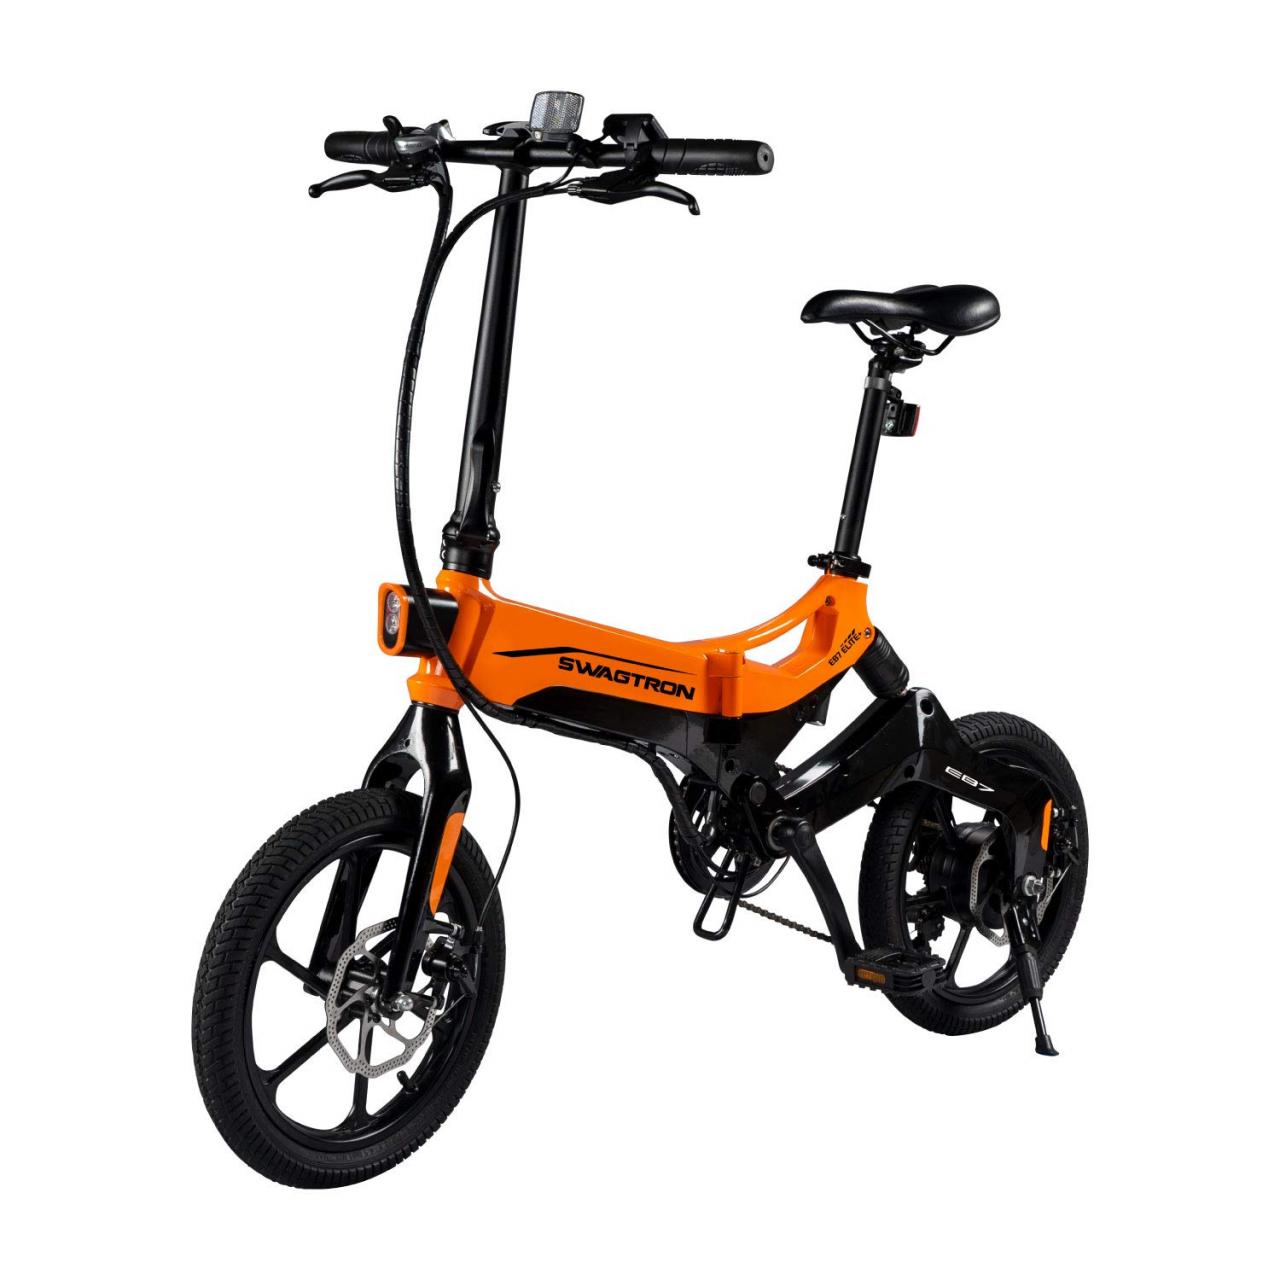 Best Electric Bikes - Top 3 Electric Bicycles